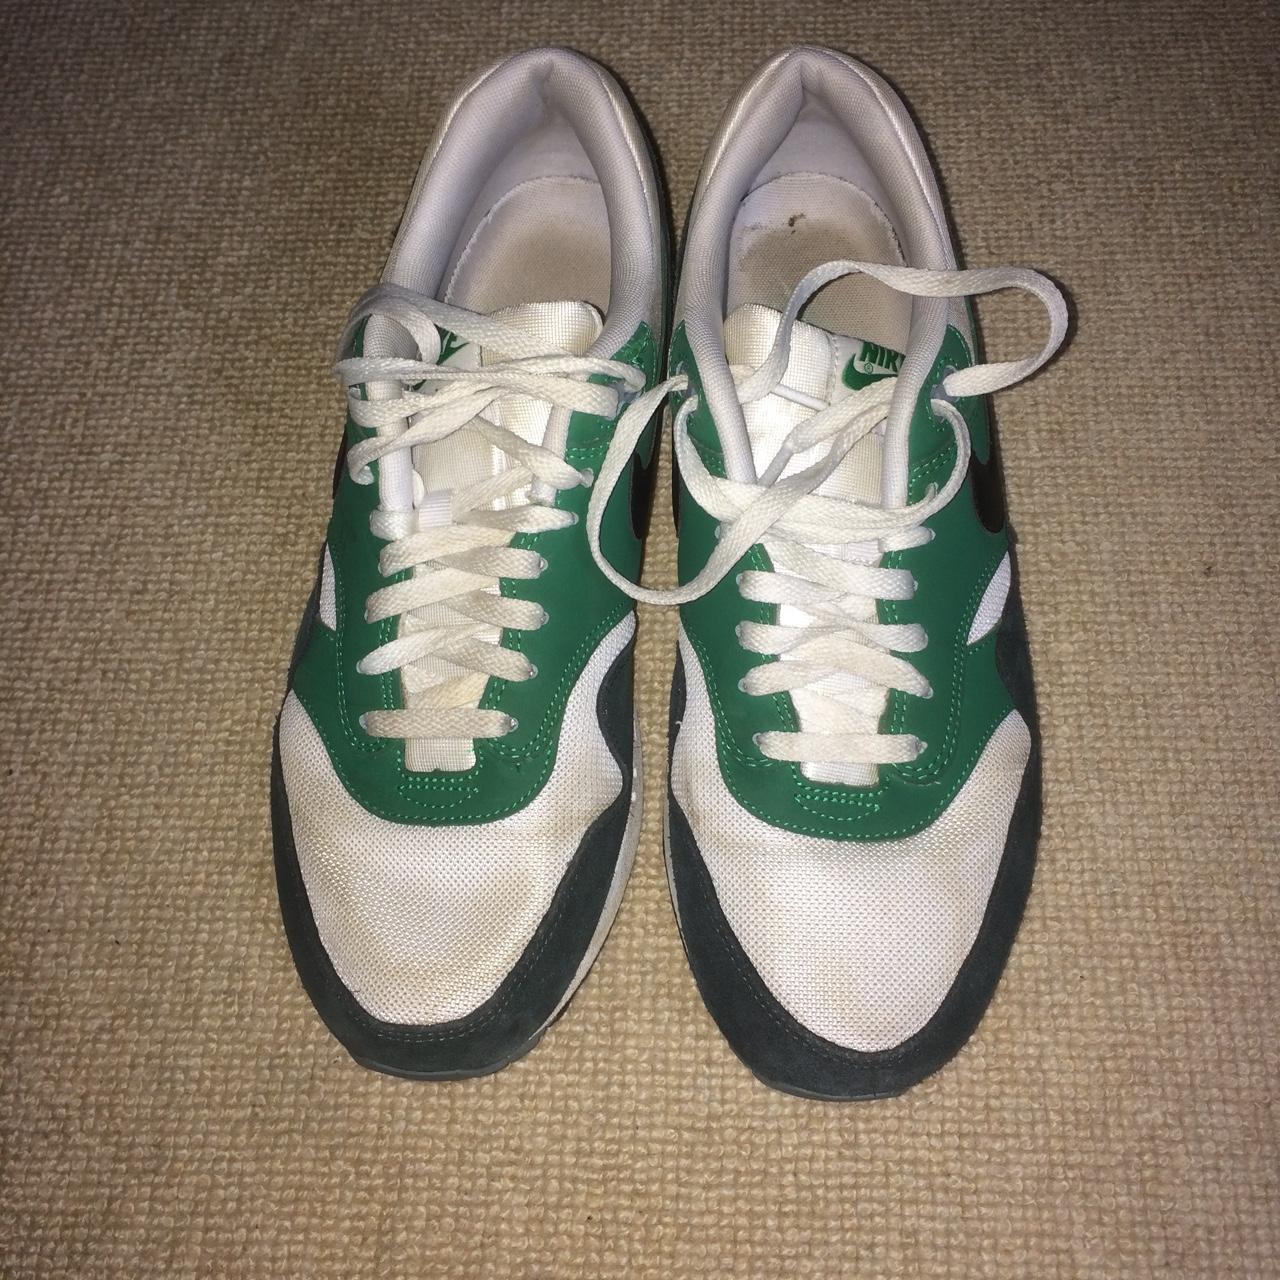 *SOLD* Nike Air Max 1 [Green/Black/White] really... - Depop